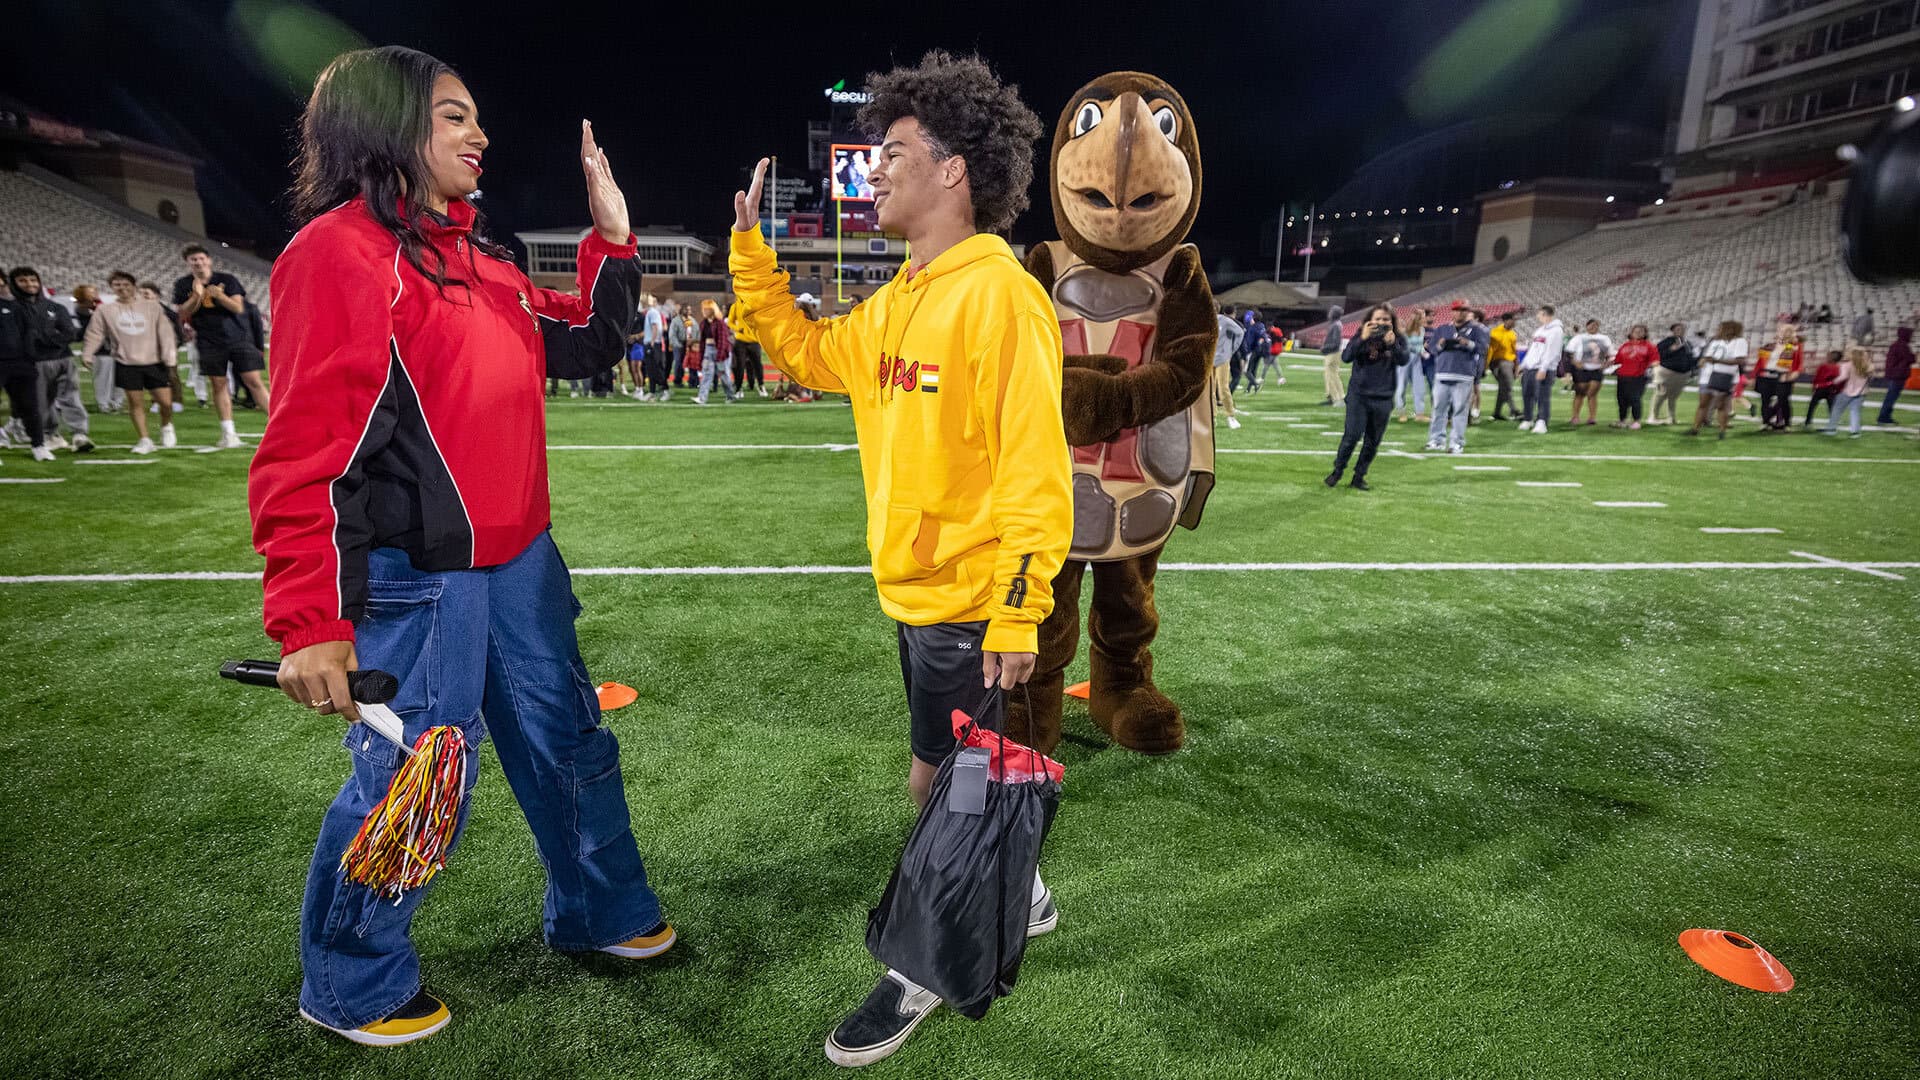 two people high five while a person dressed in a turtle mascot stands nearby on a football field